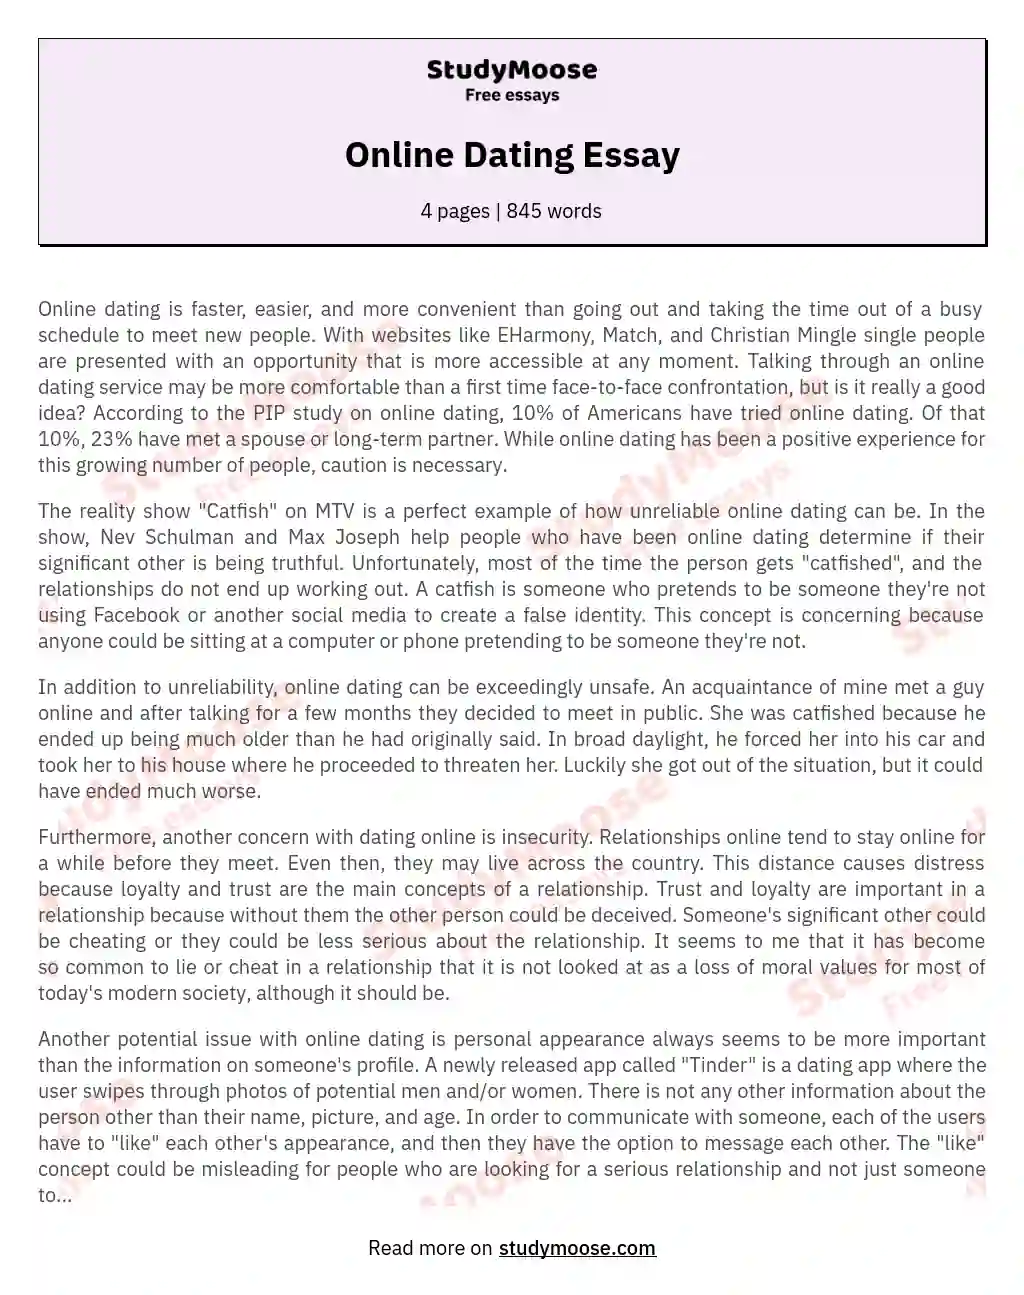 good essay titles for online dating